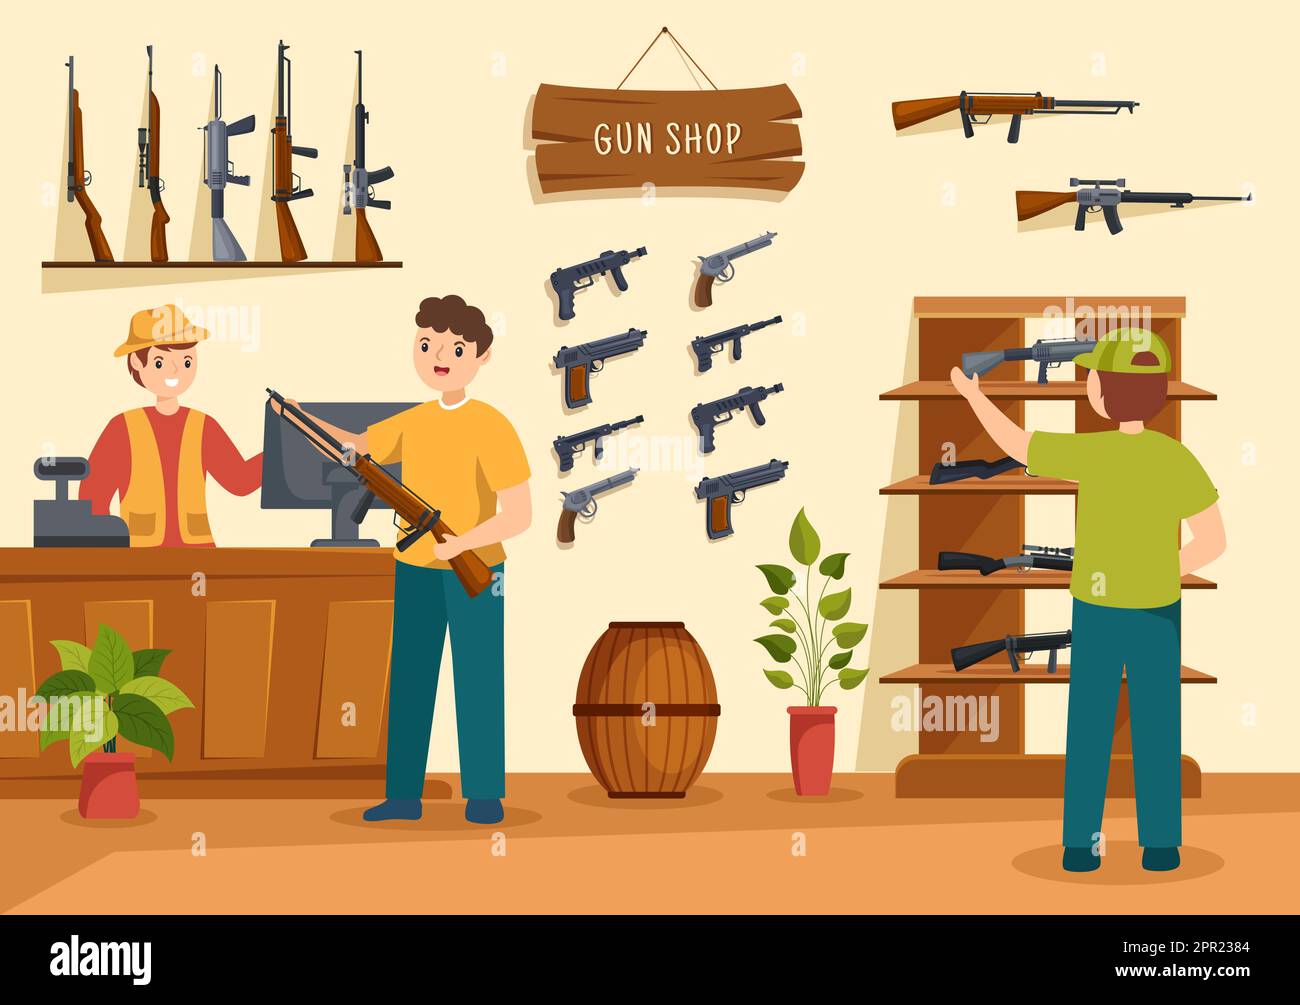 Gun Shop or Hunting with Rifle, Bullet, Weapon and Hunt Equipment in Flat Style Cartoon Hand Drawn Templates Illustration Stock Vector